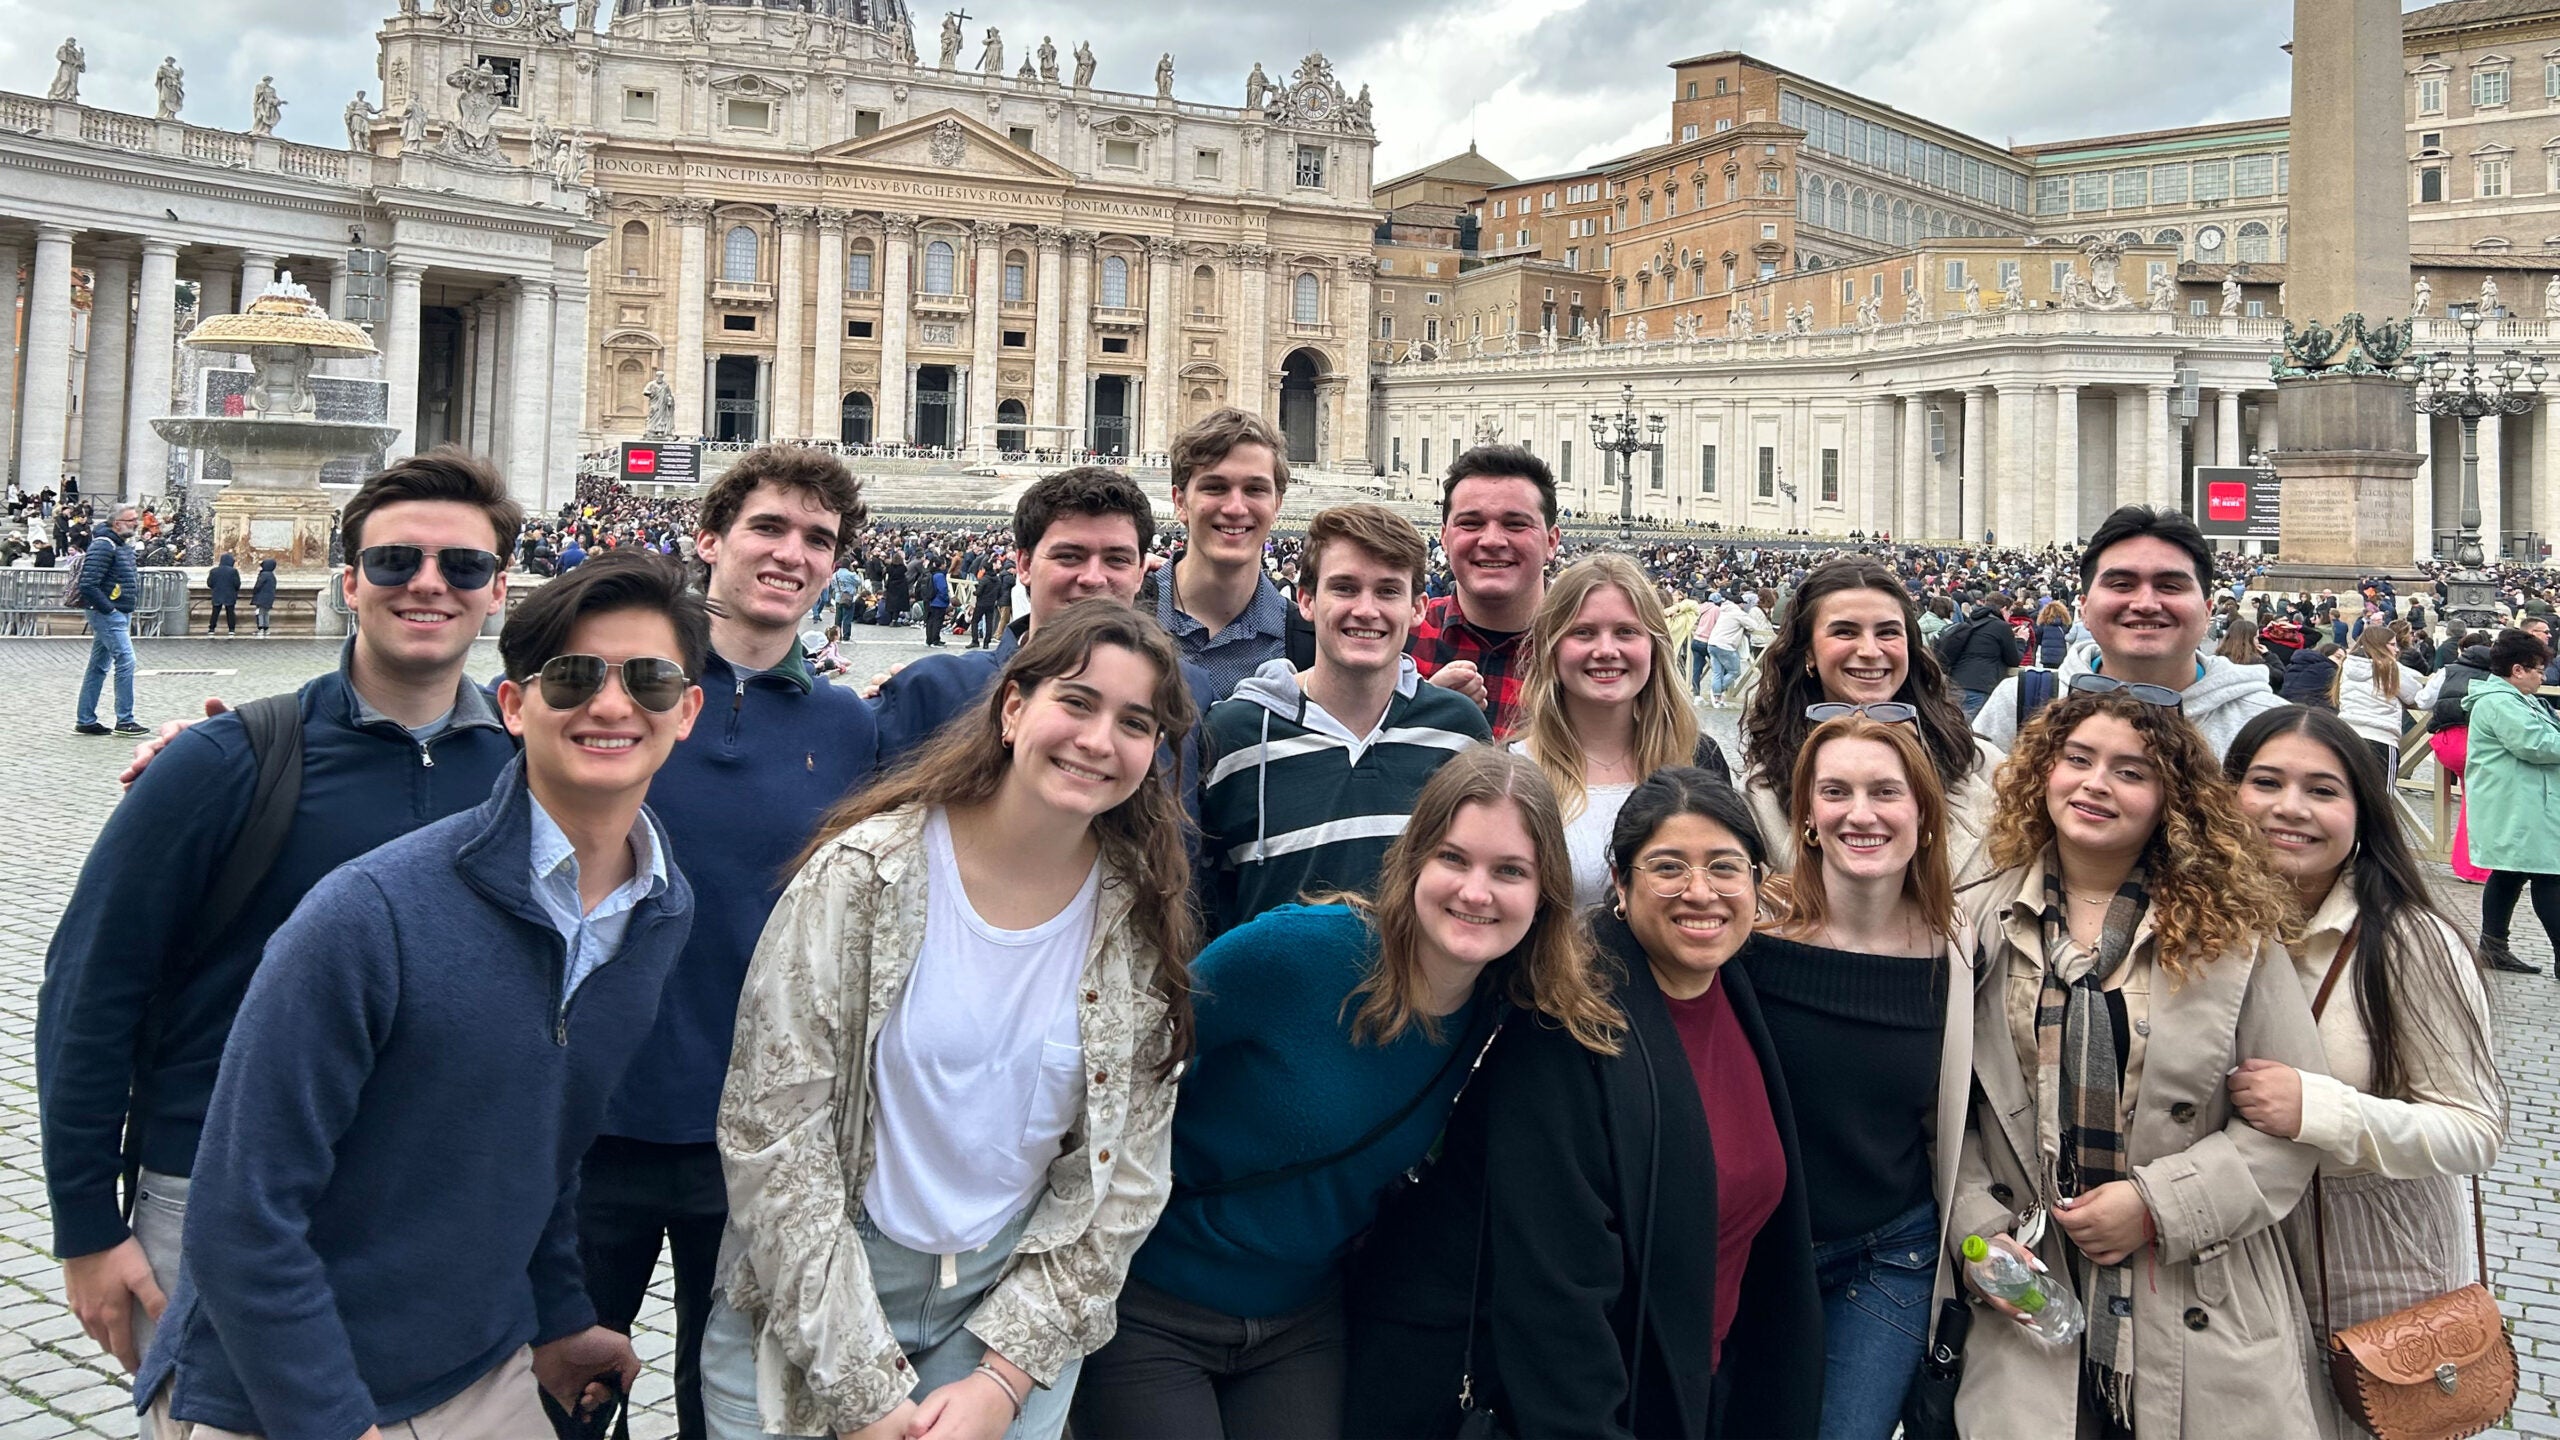 A group of students standing in St Peter's Square, Vatican City with Saint Peter's Basilica in the background.